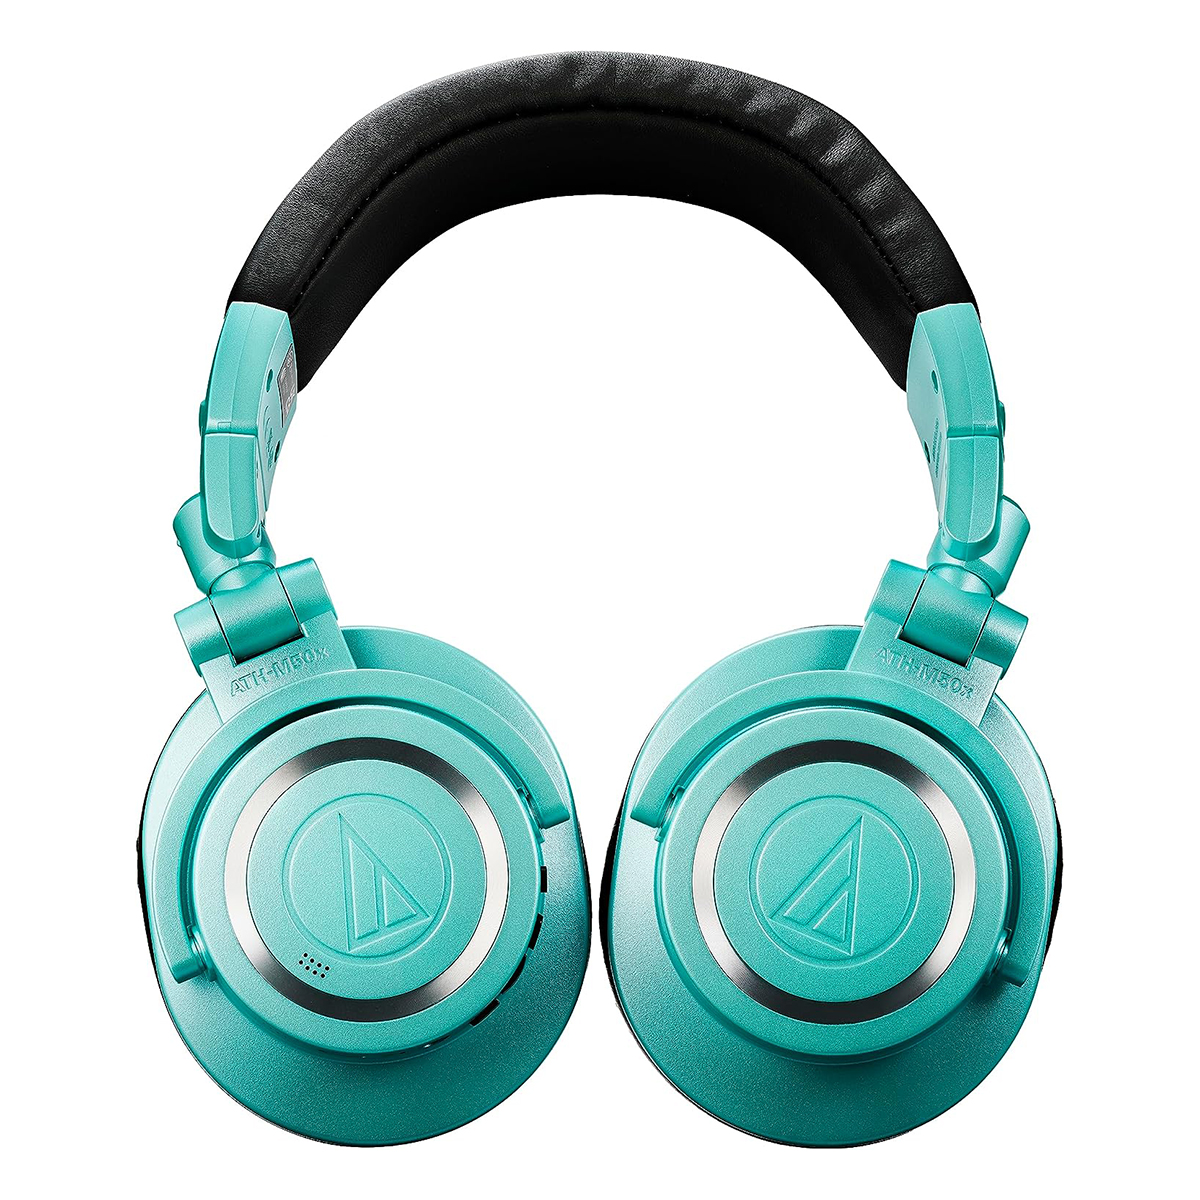 Tai nghe Audio Technica ATH-M50xBT2 Ice Blue